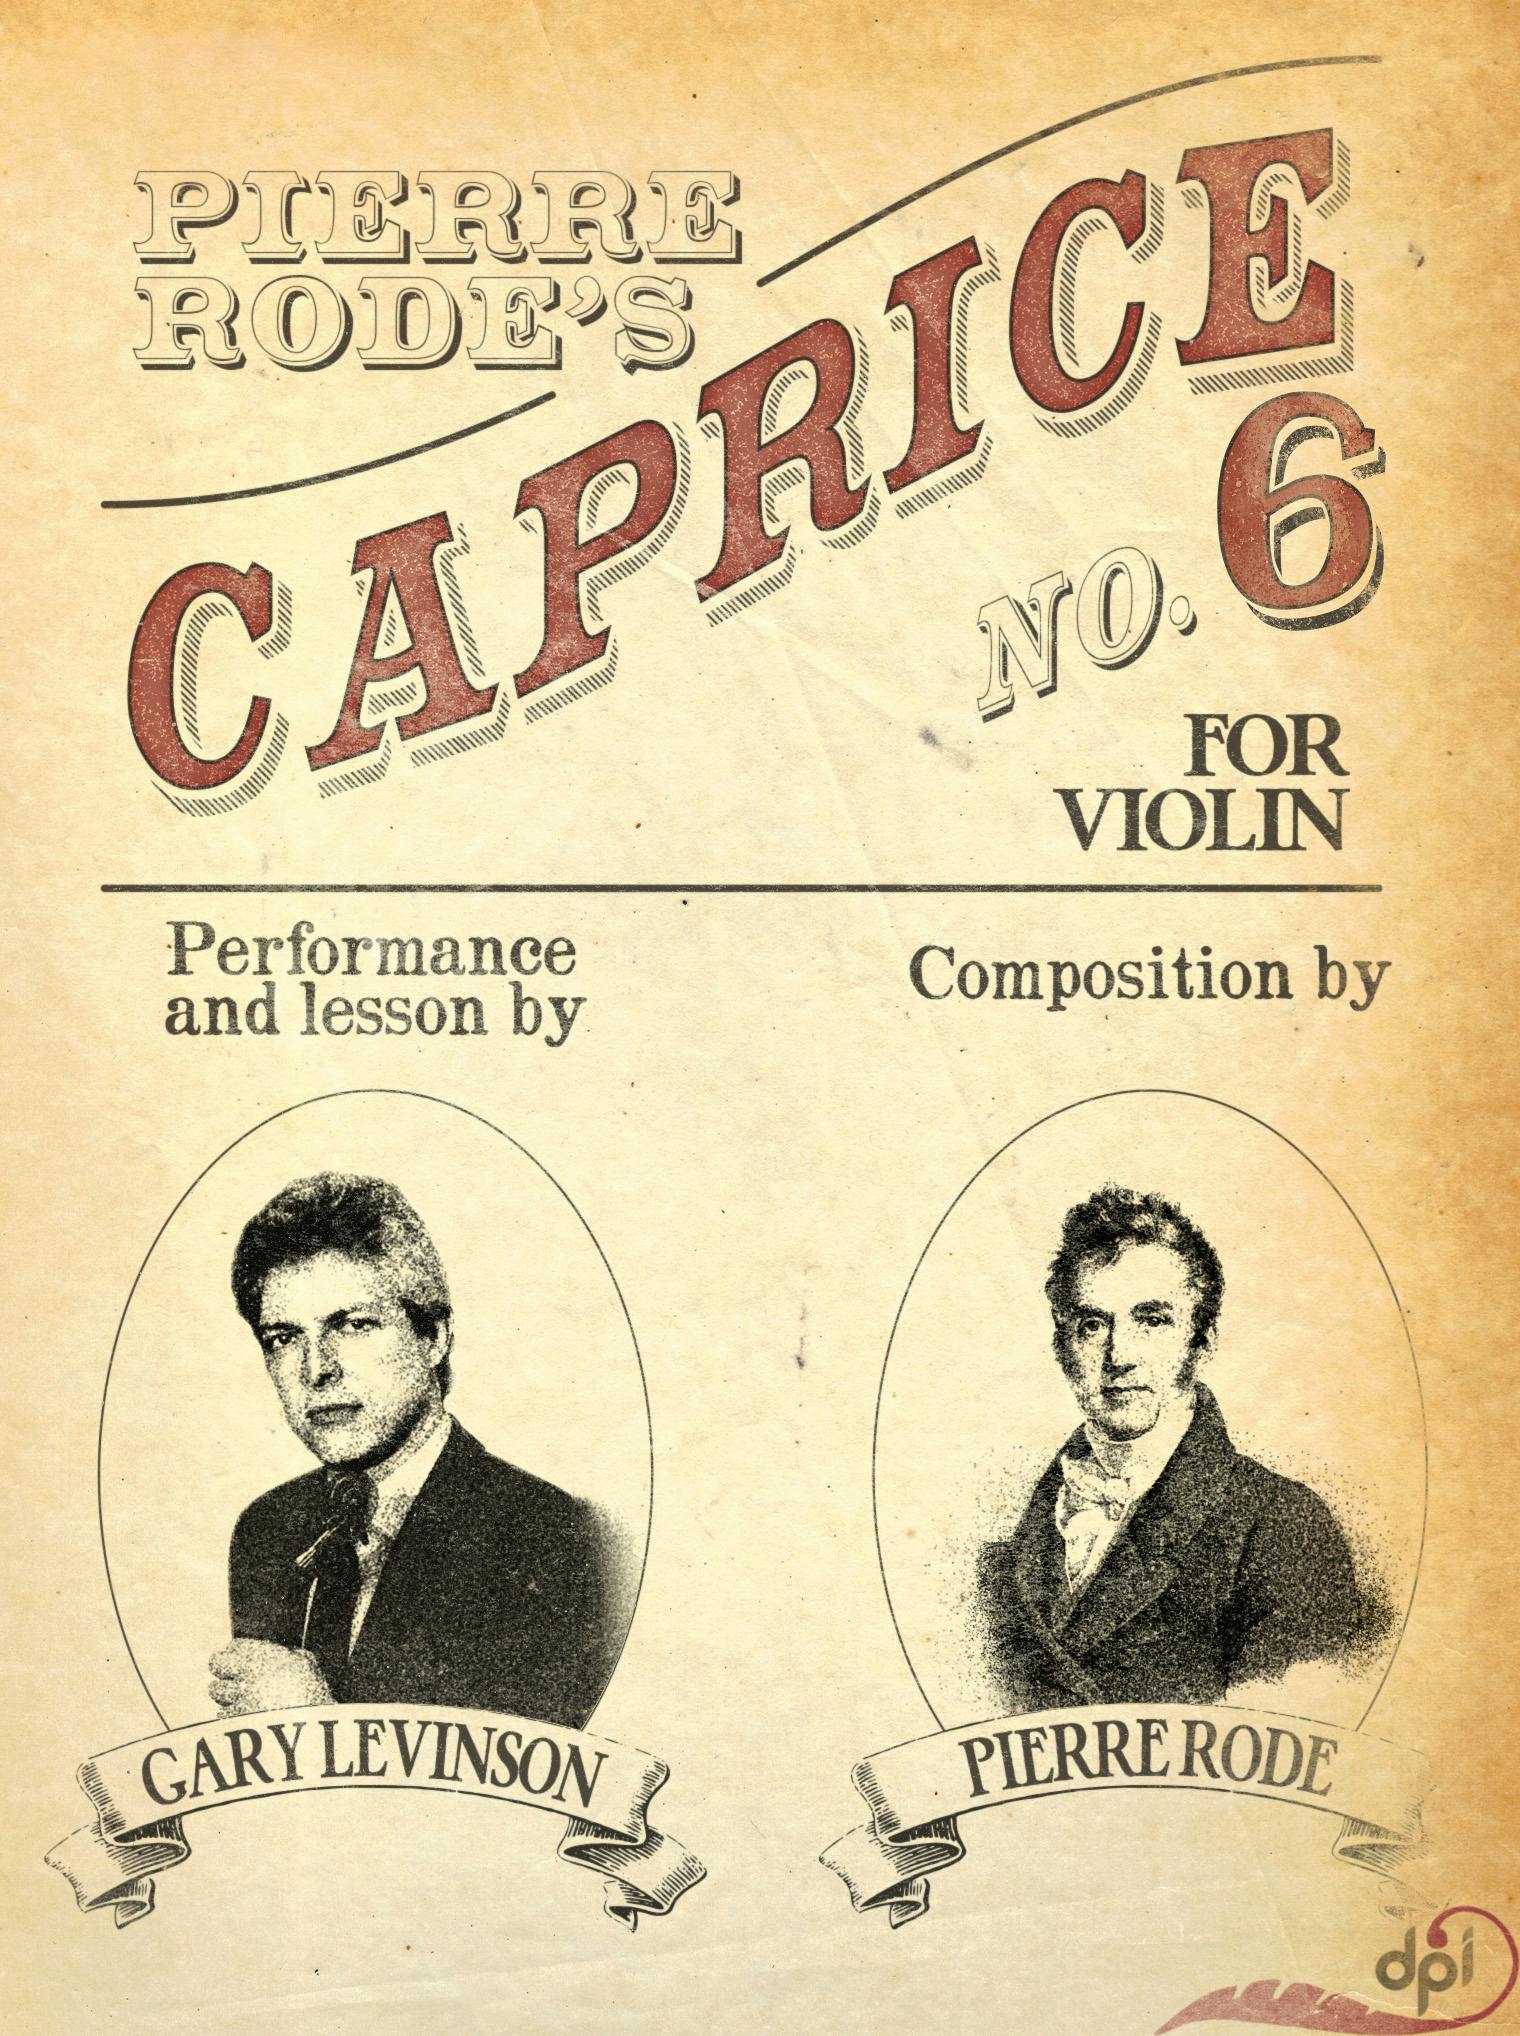 Pierre Rode's Caprice No. 6 cover